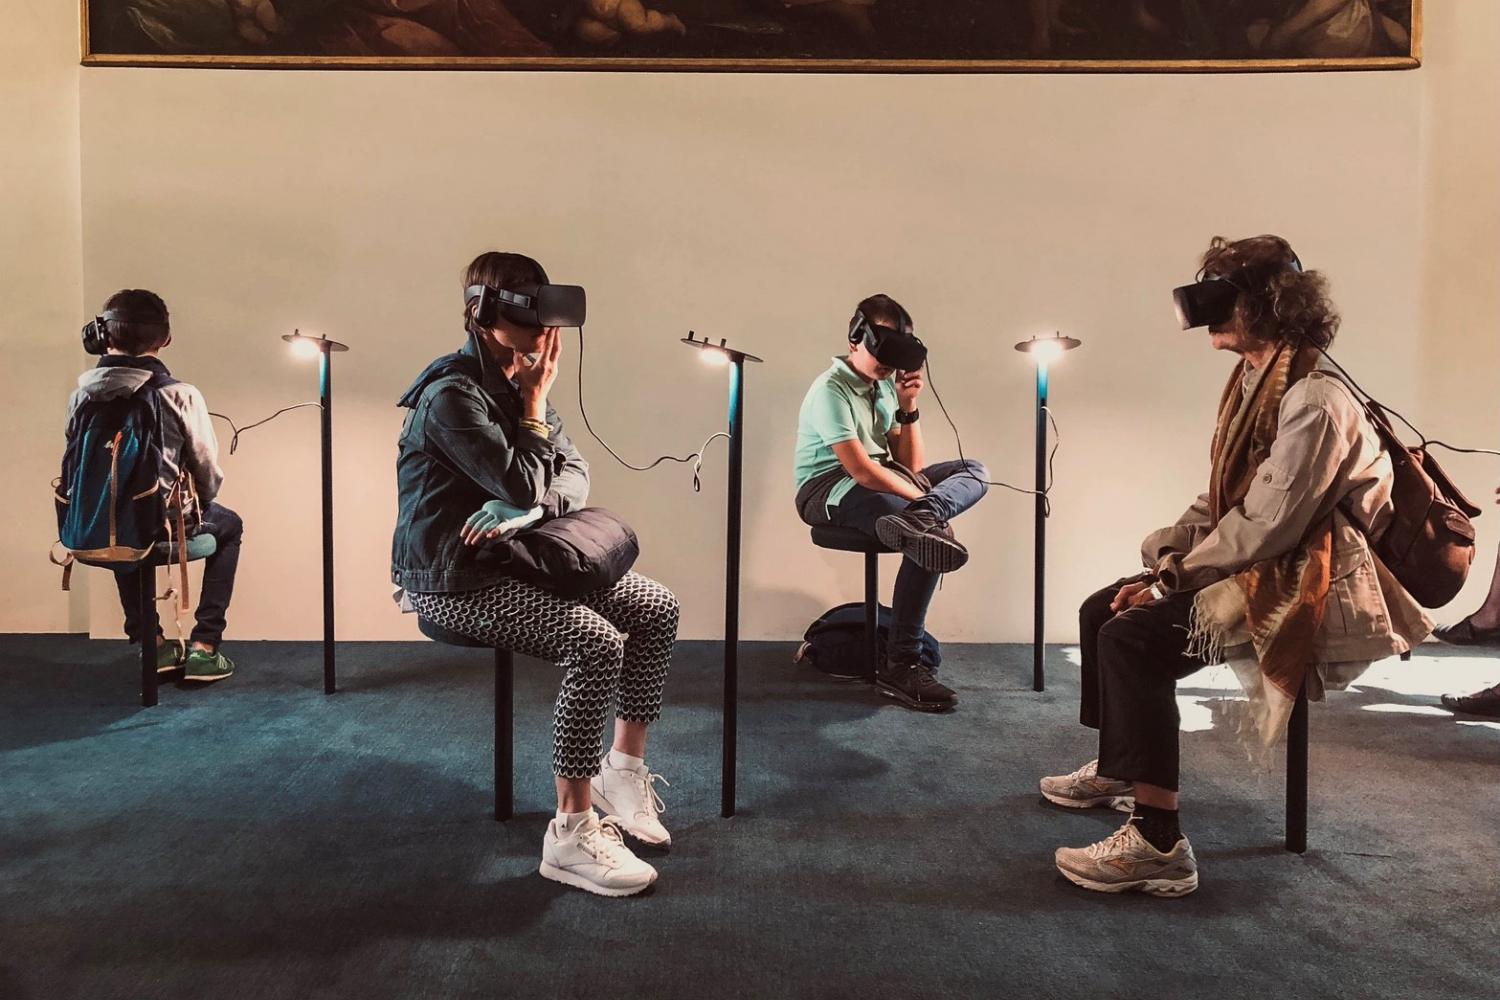 Virtual reality headsets in an art museum